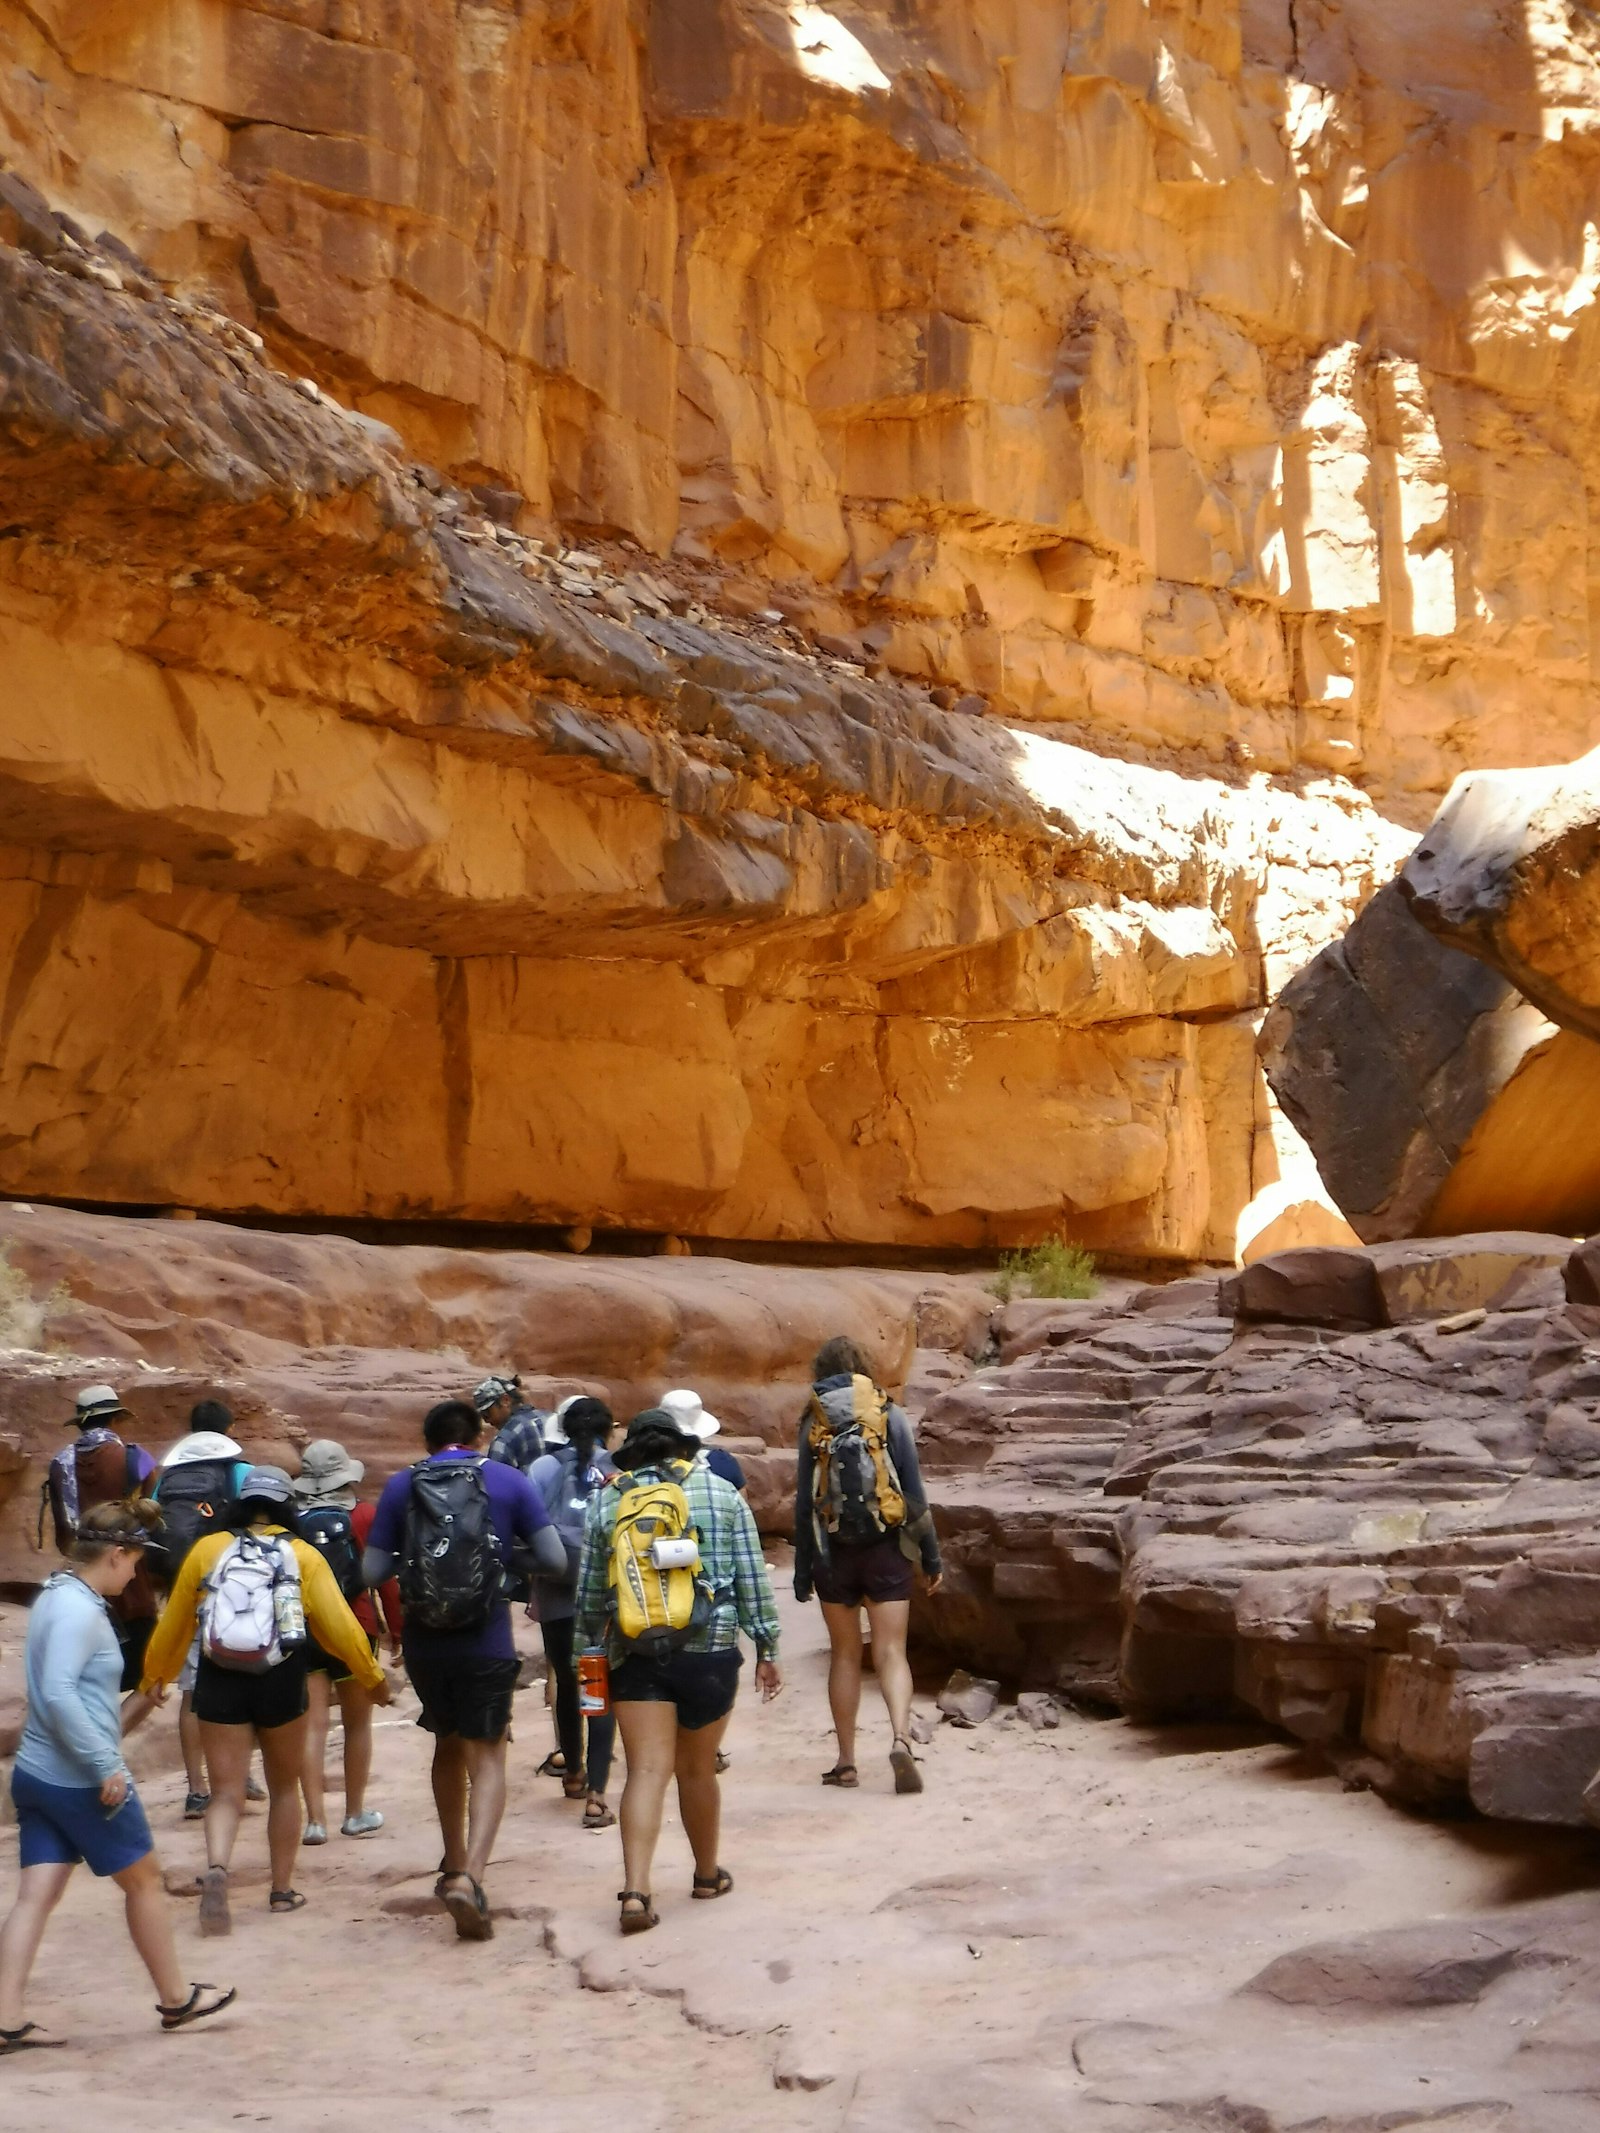 A group of people walk through the base of a canyon